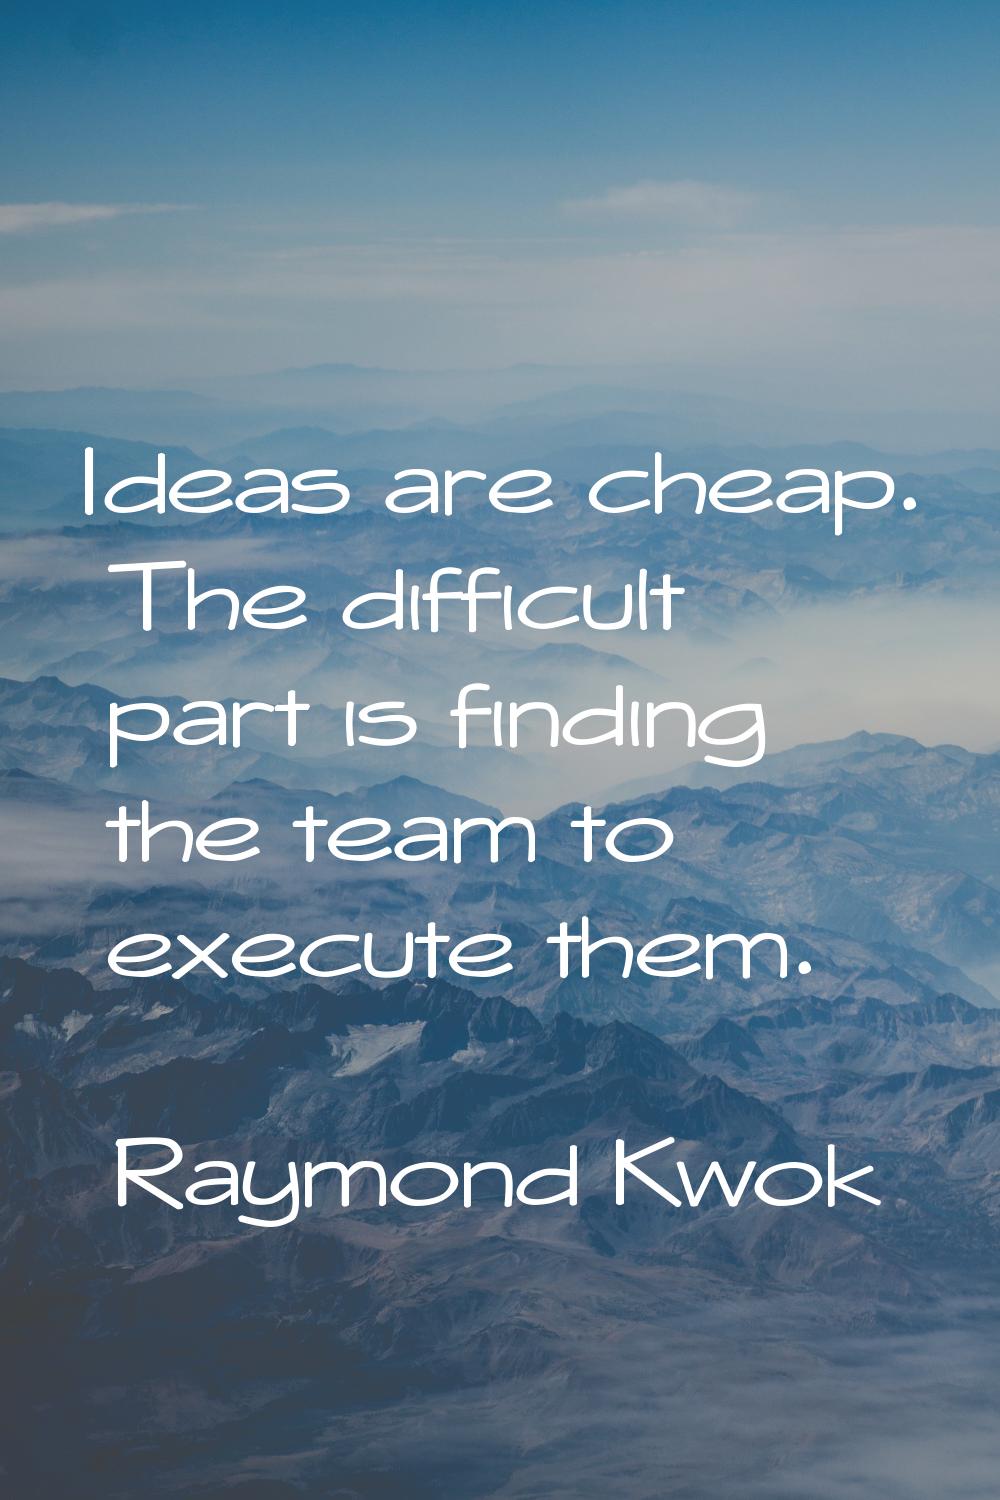 Ideas are cheap. The difficult part is finding the team to execute them.